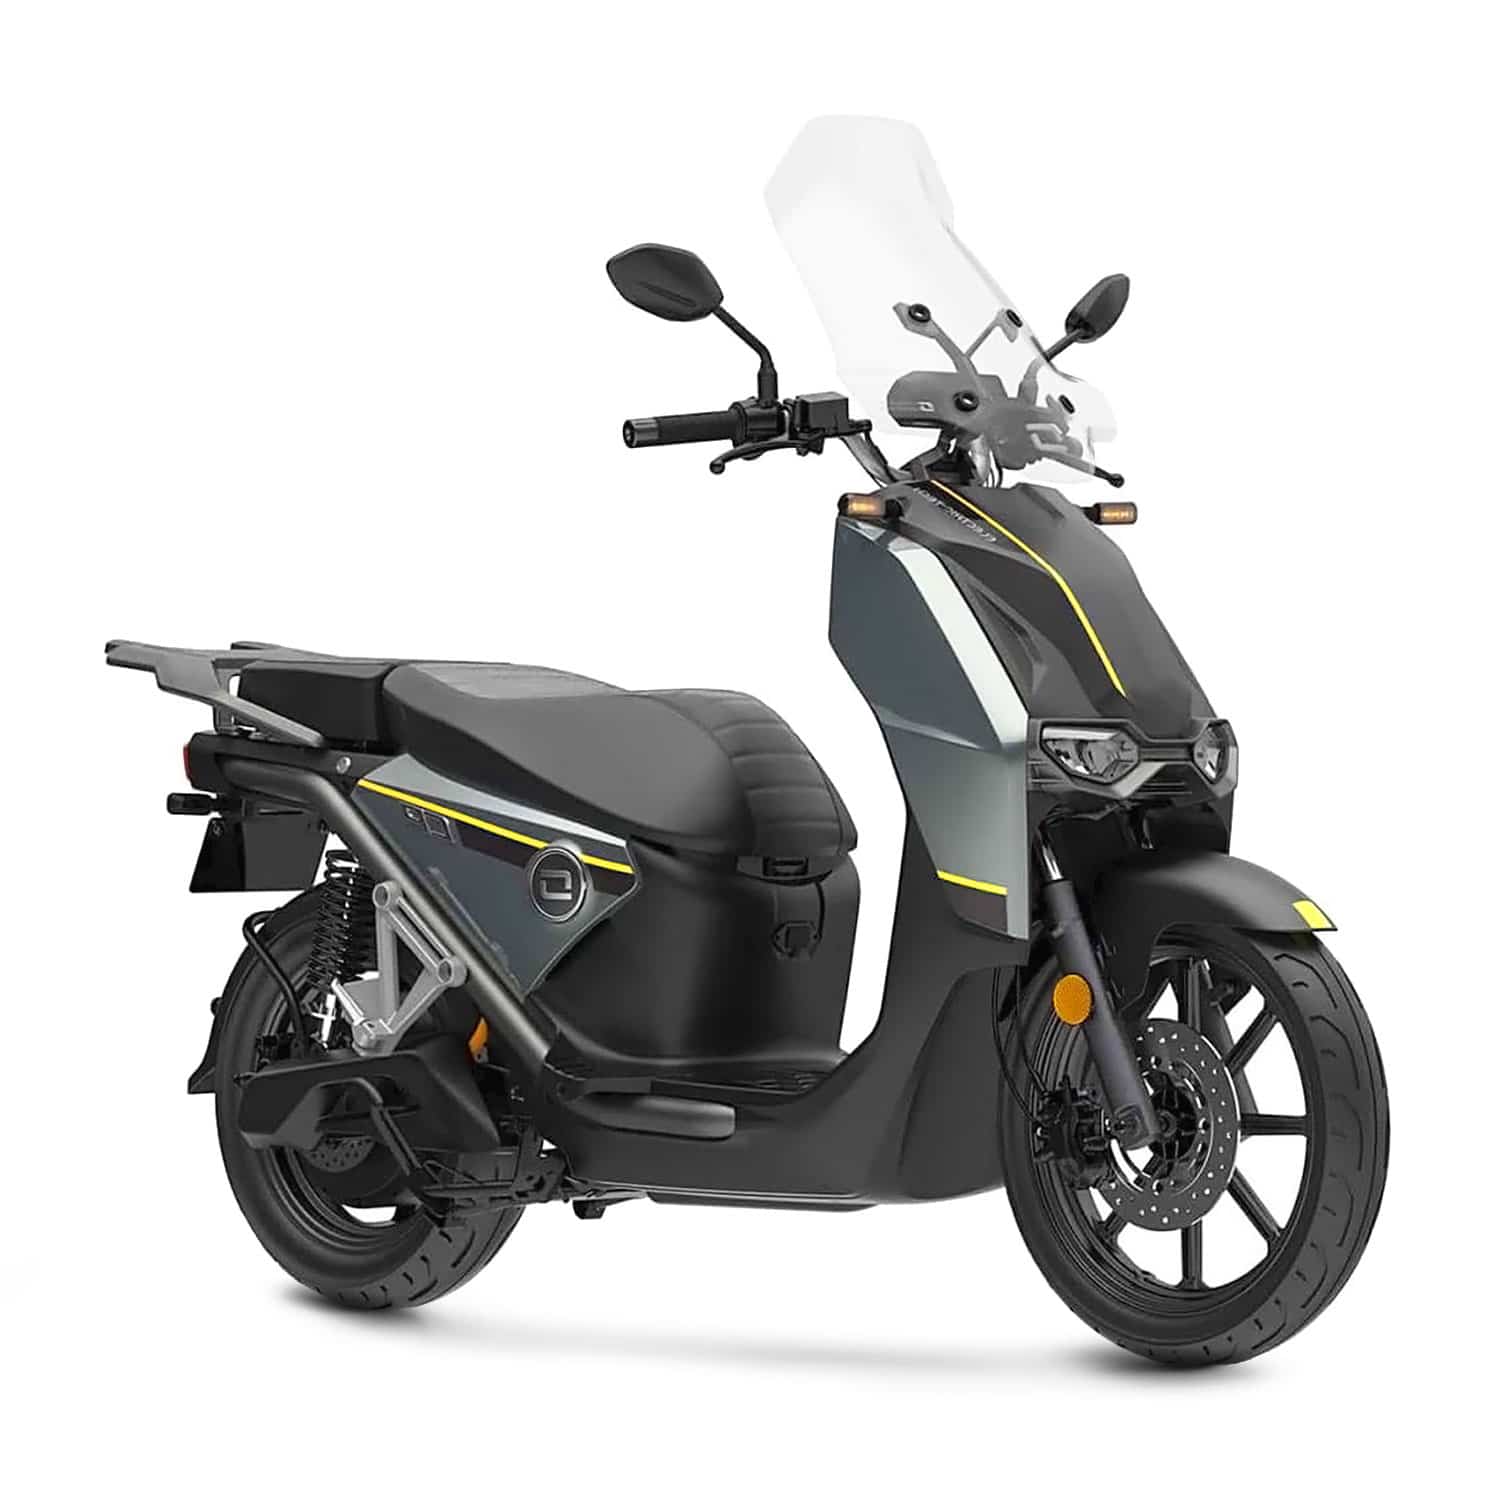 Tablier Arrière Pour Scooter Chinois 50 Neuf